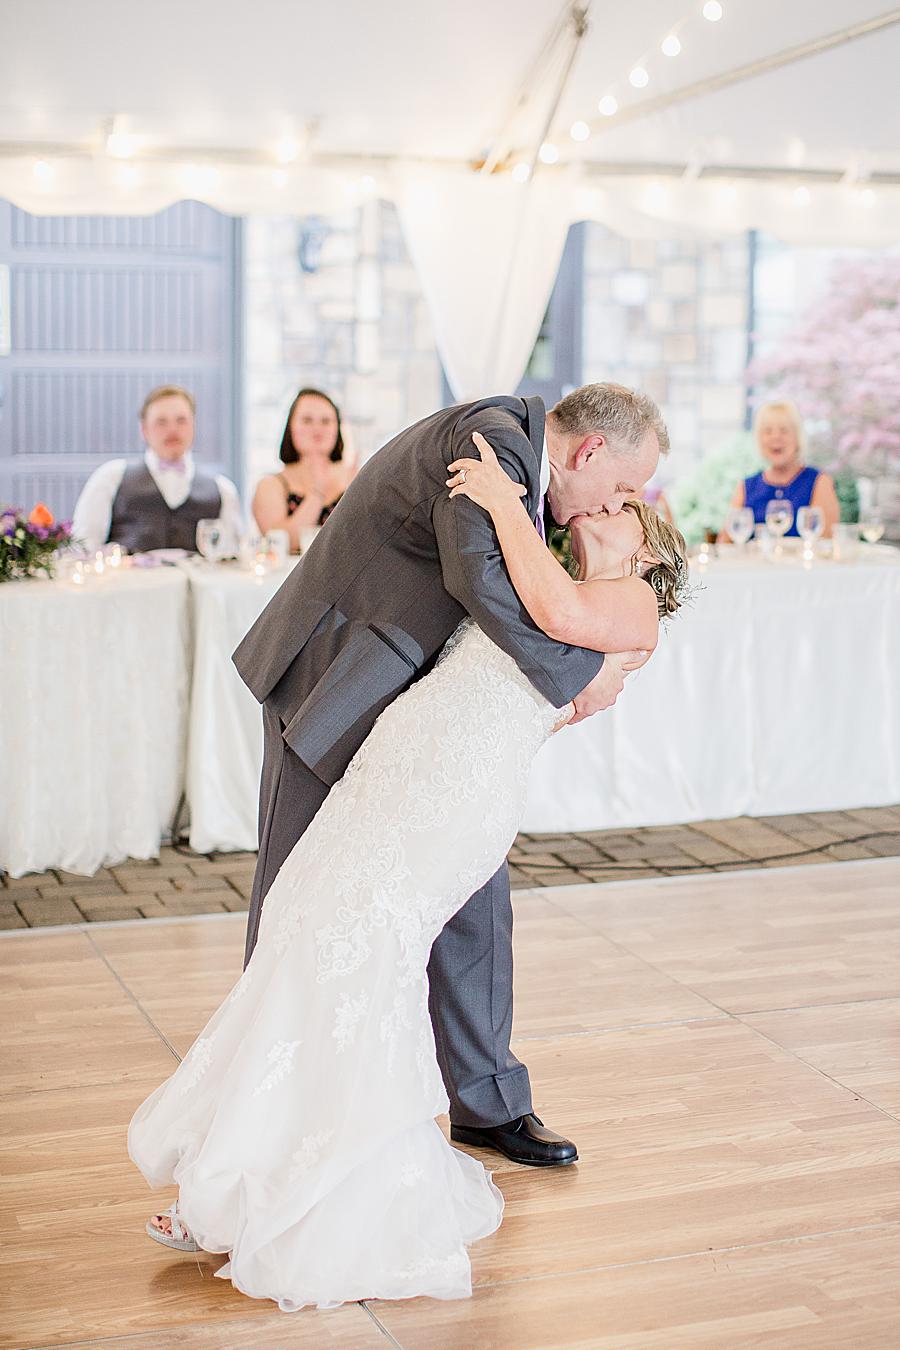 First dance dip at this intimate WindRiver wedding by Knoxville Wedding Photographer Amanda May Photos.